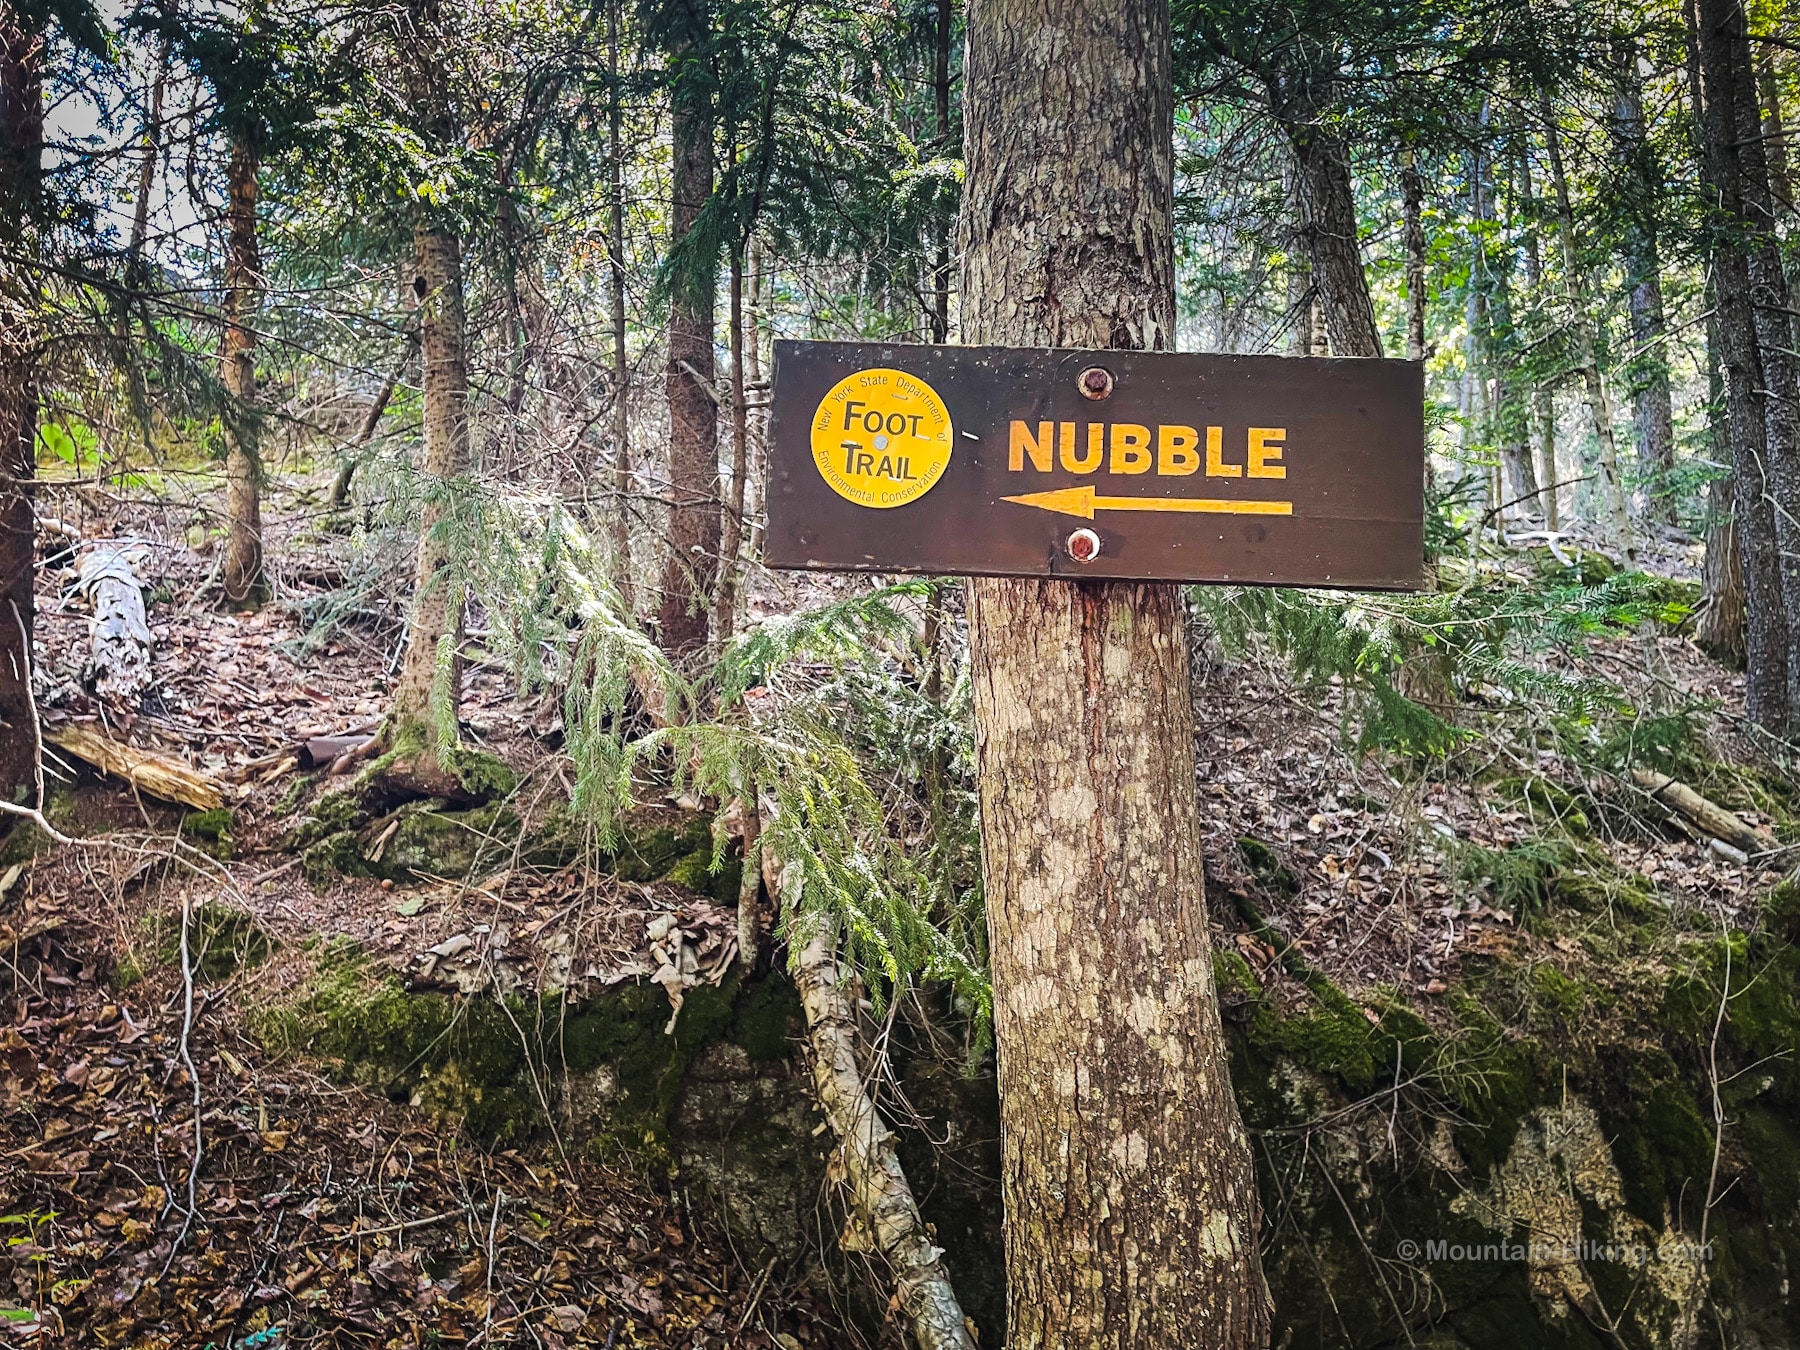 Trail sign in woods for Giant’s Nubble